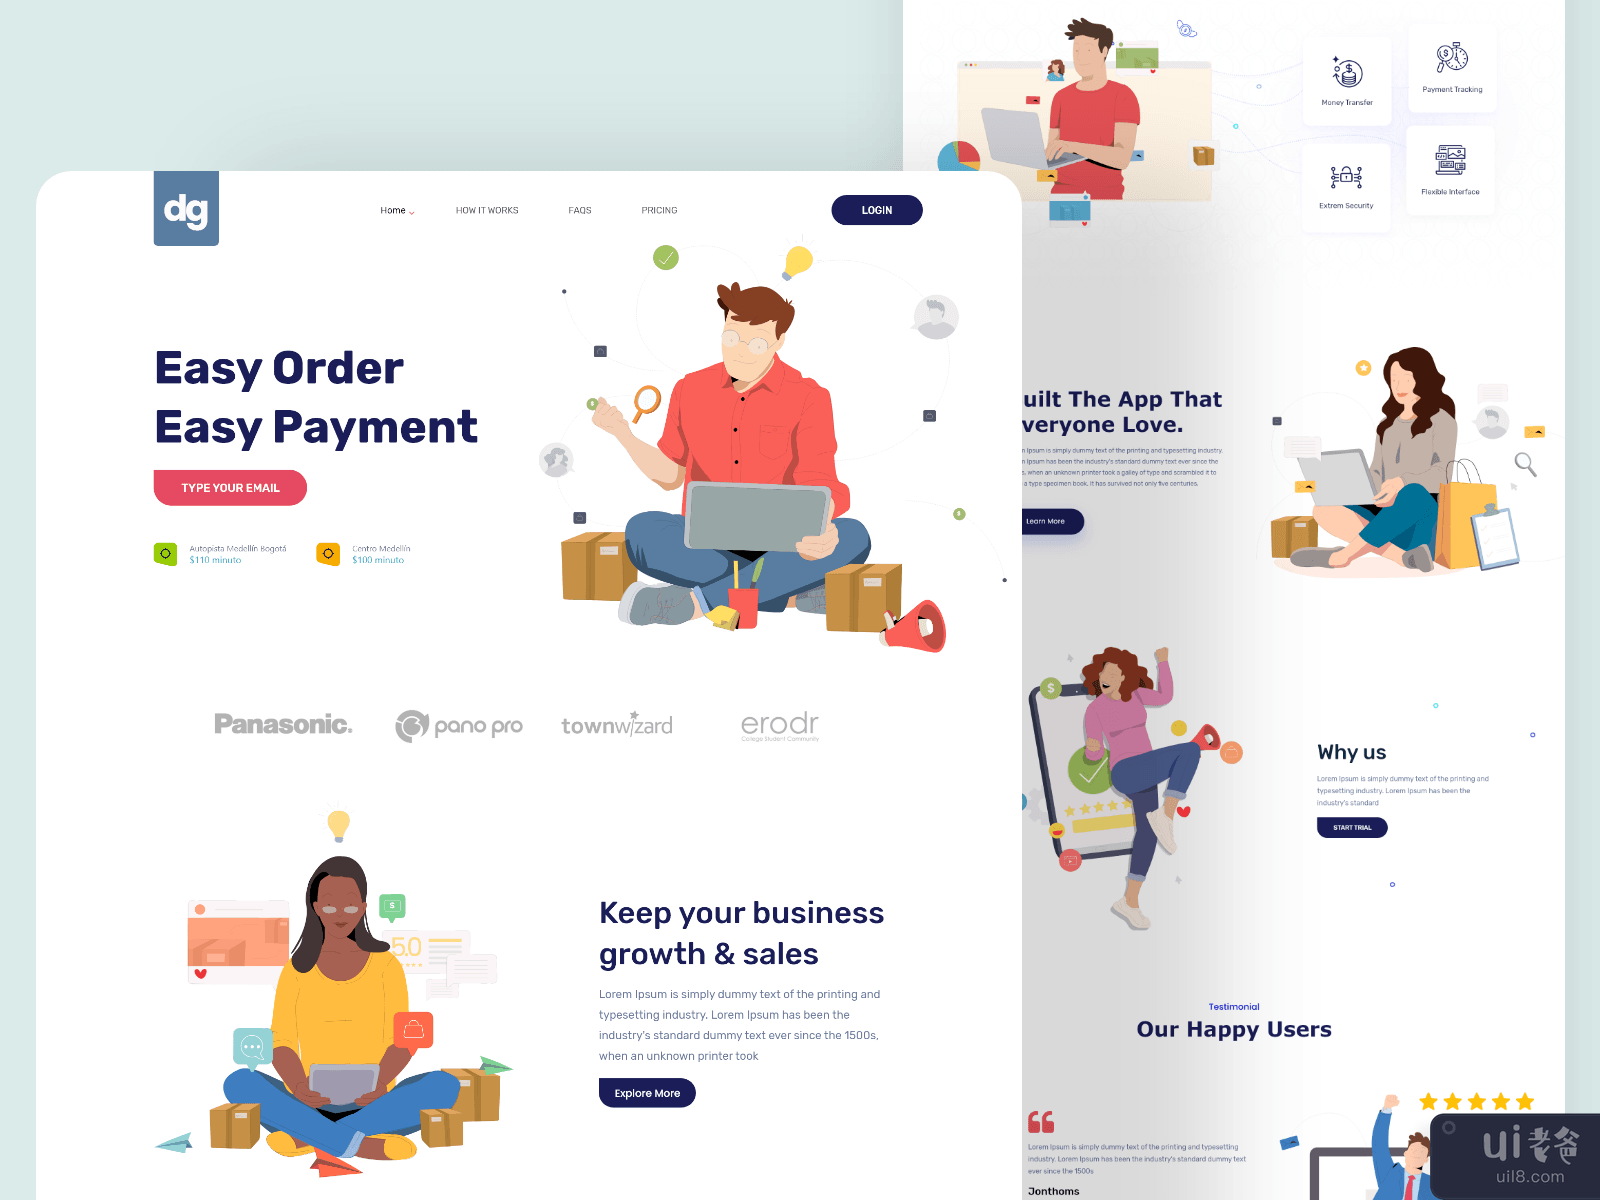 online app payments landing page